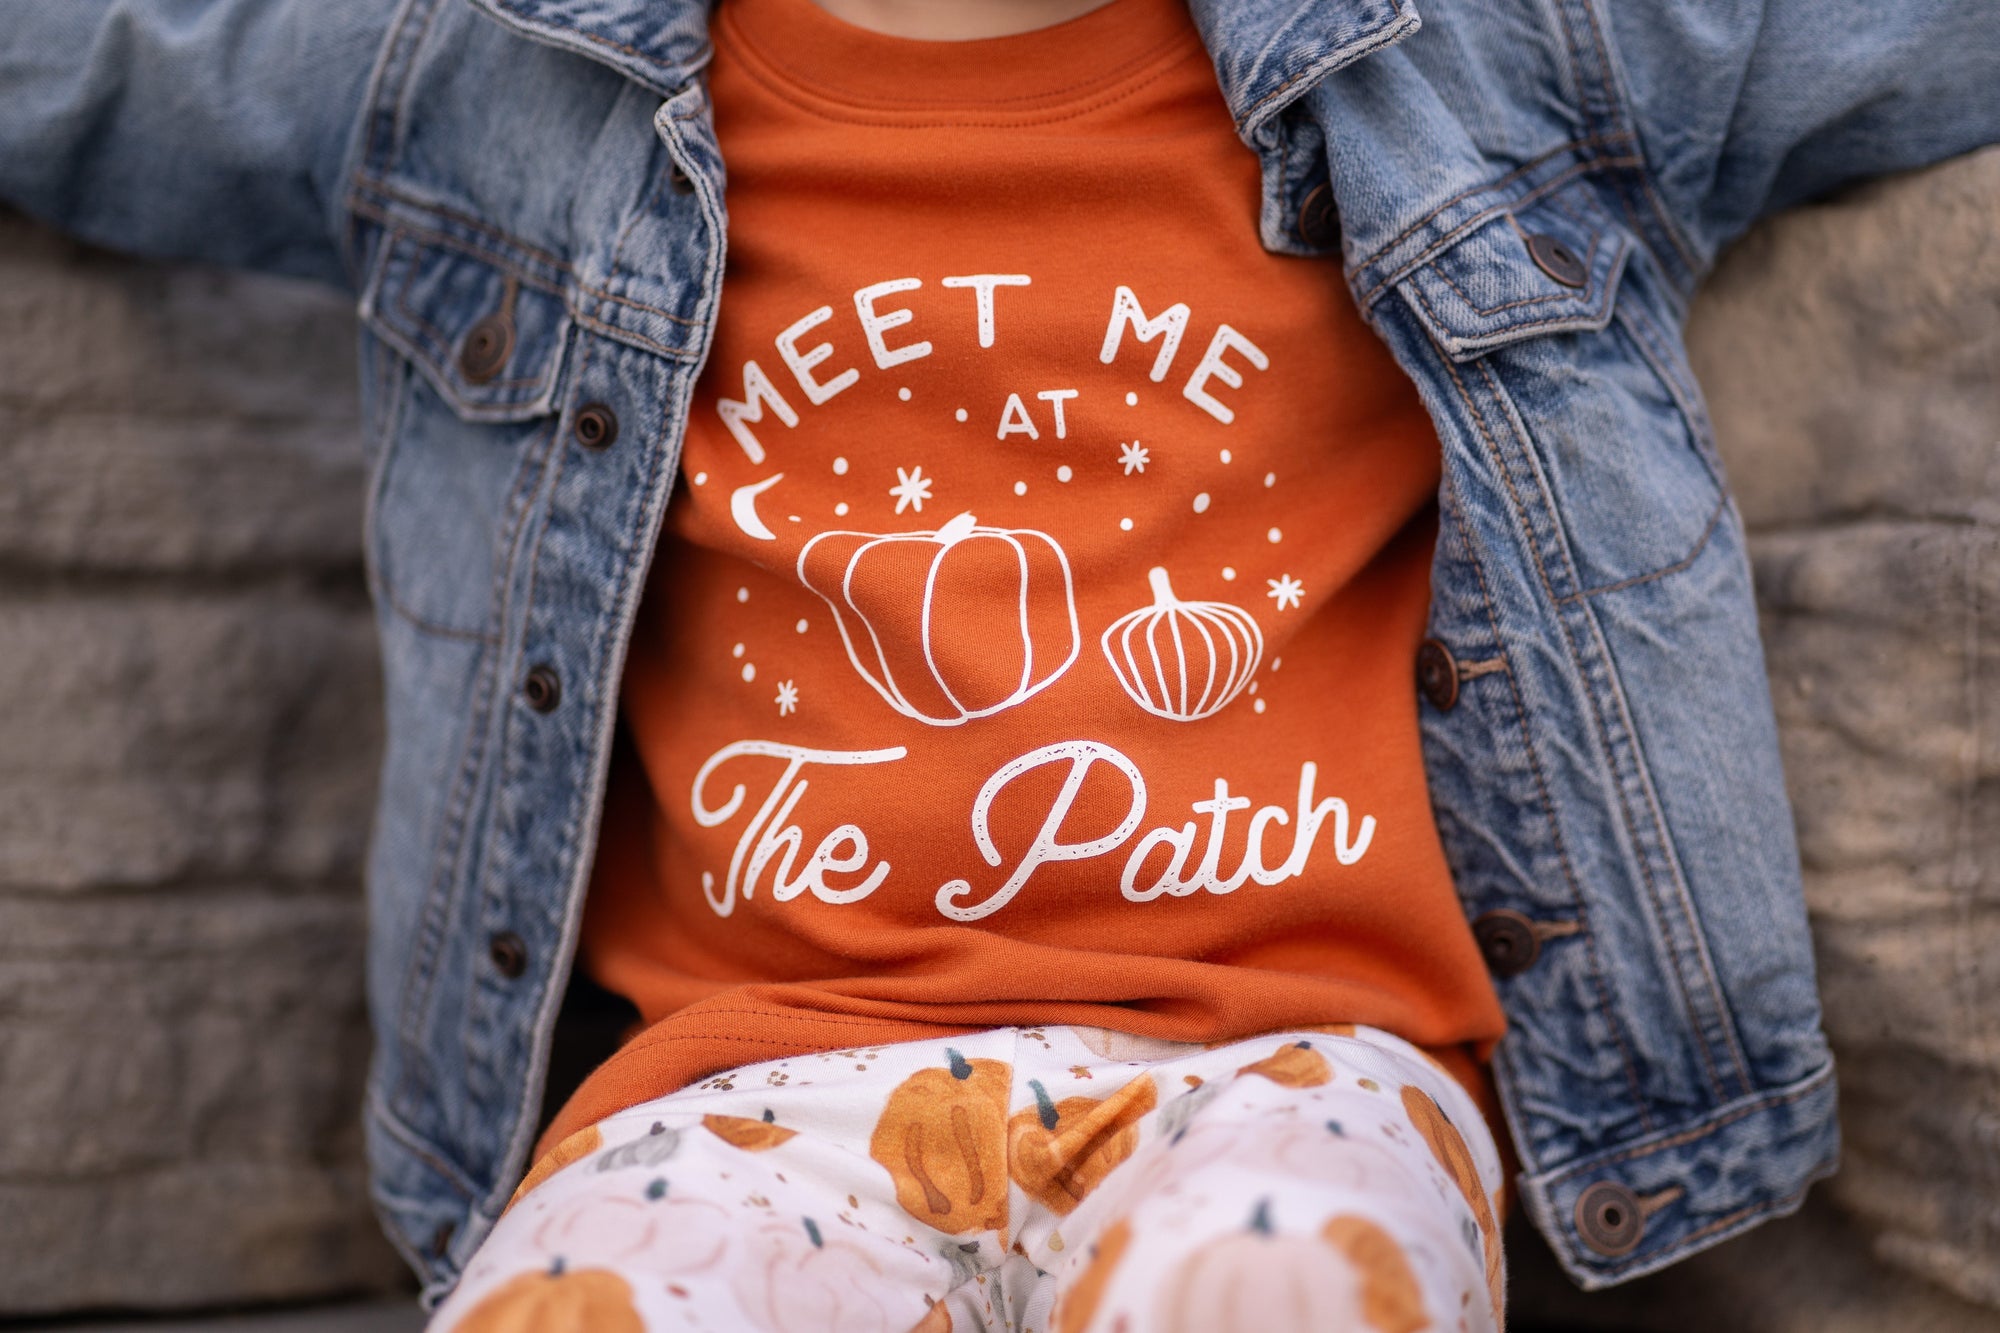 Cuddle Sleep Dream Graphic Tee Meet me at the Patch Tshirt